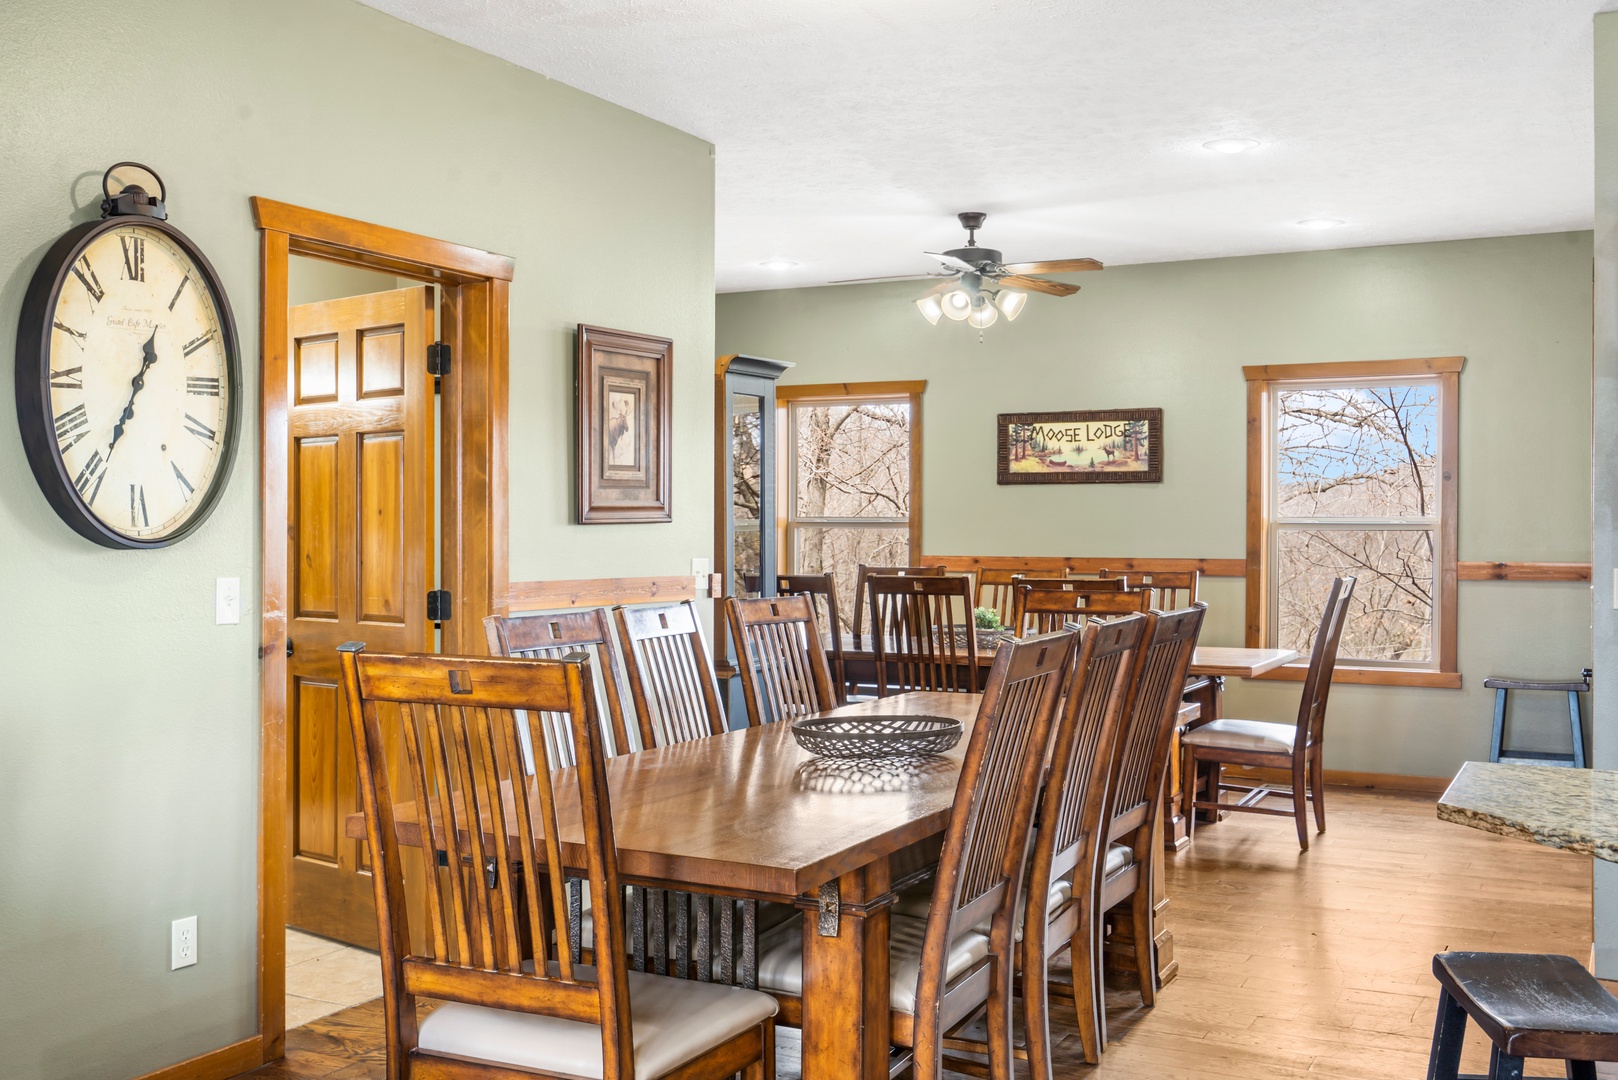 Gather for meals together at the dining tables, offering total seating for 16